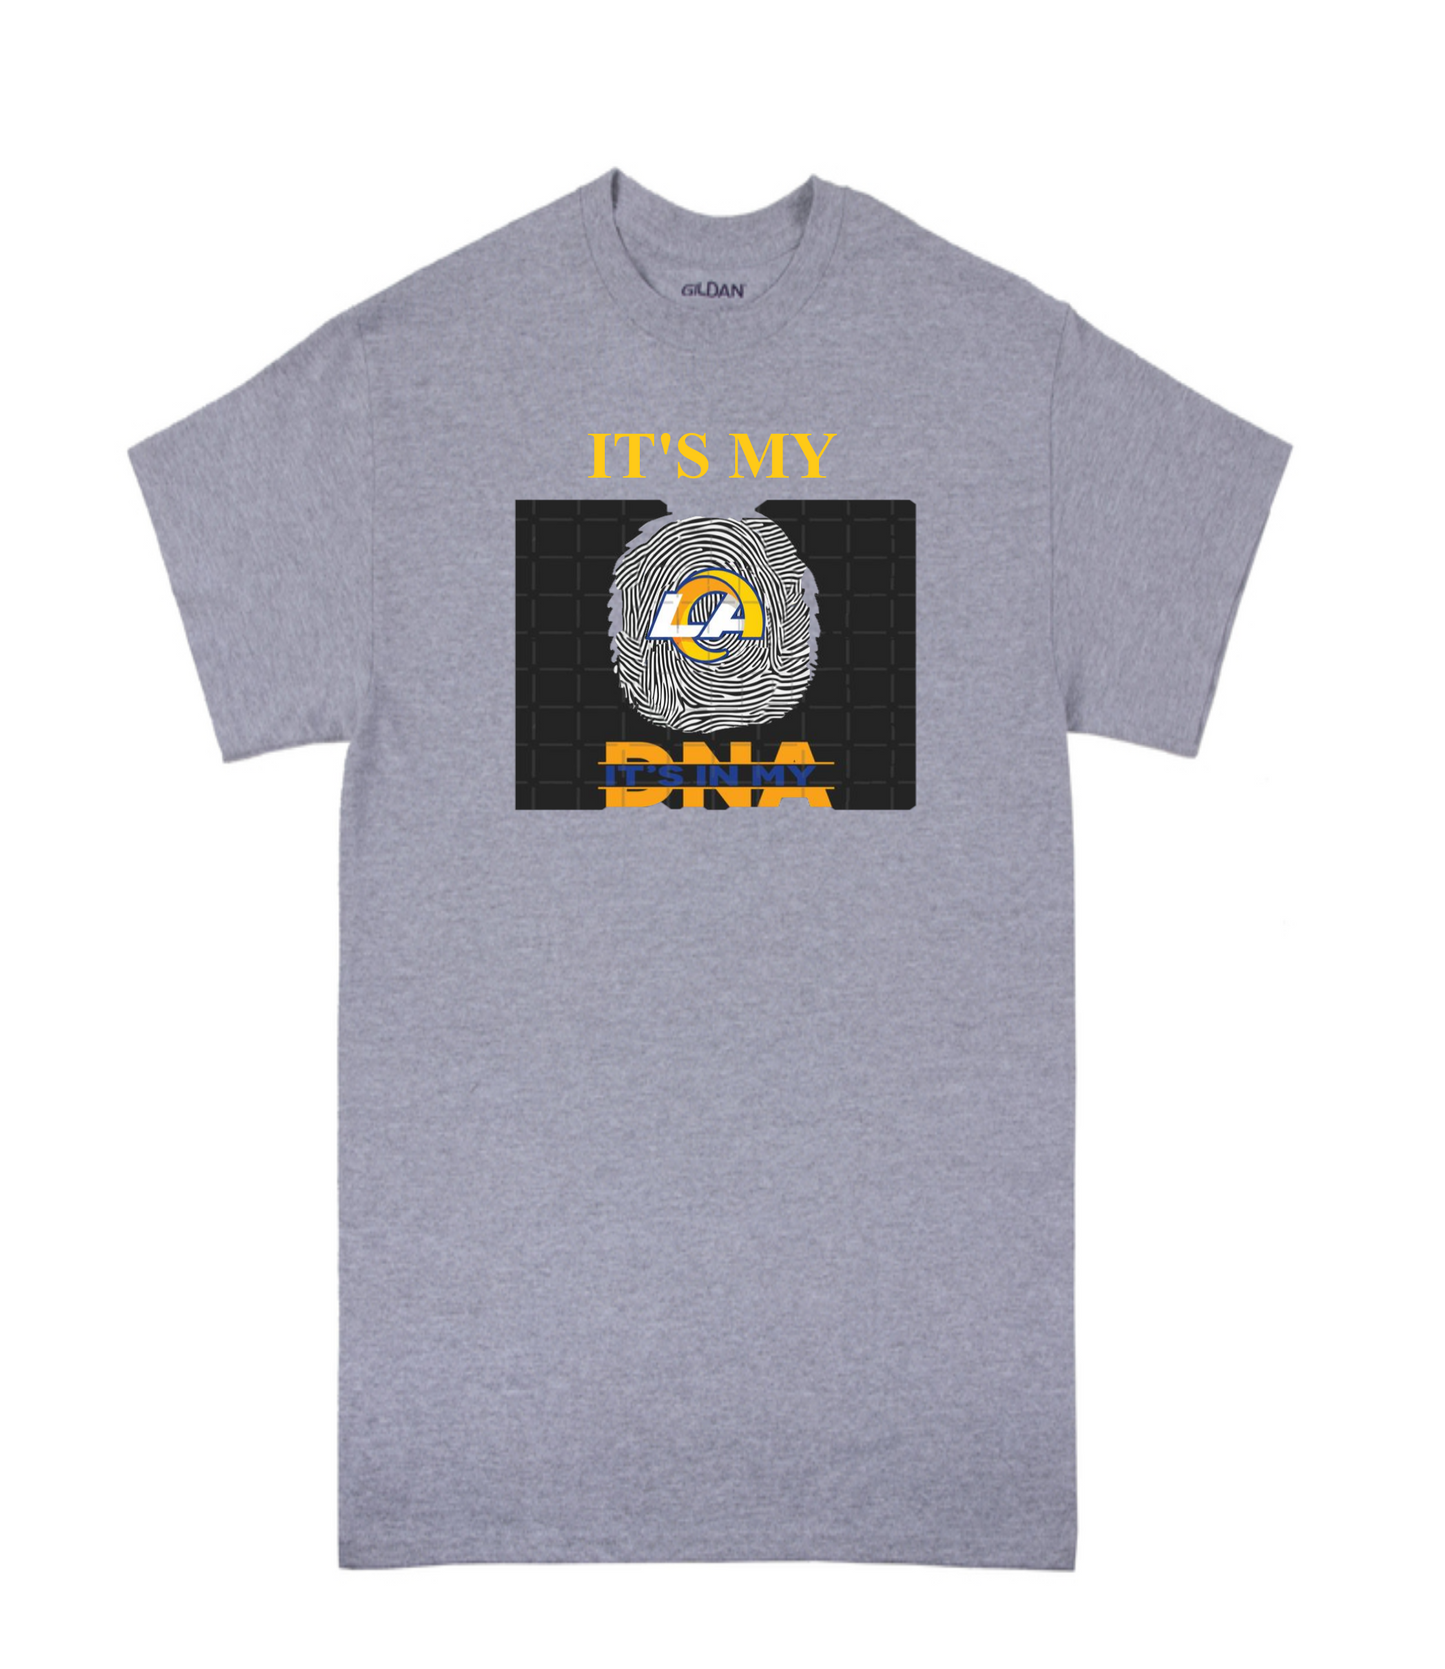 L. Angeles Rams Football Adult & Youth T-shirts